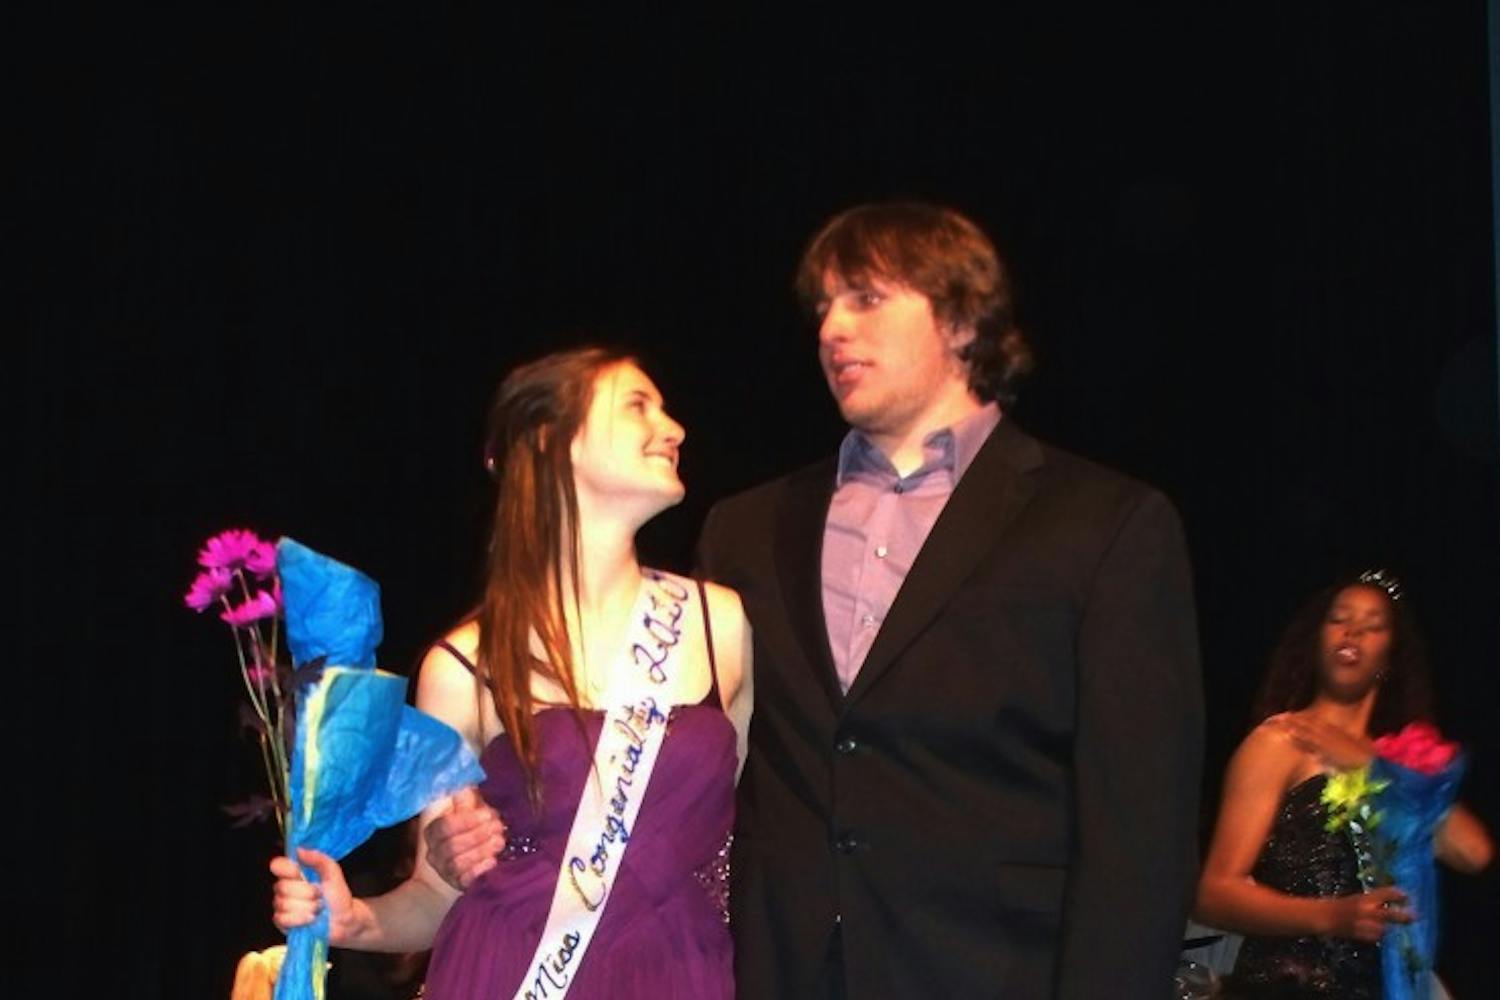 Joe supports Huskinson through her unexpected entry in the high school pageant.
Photo courtesy of Harmony Huskinson